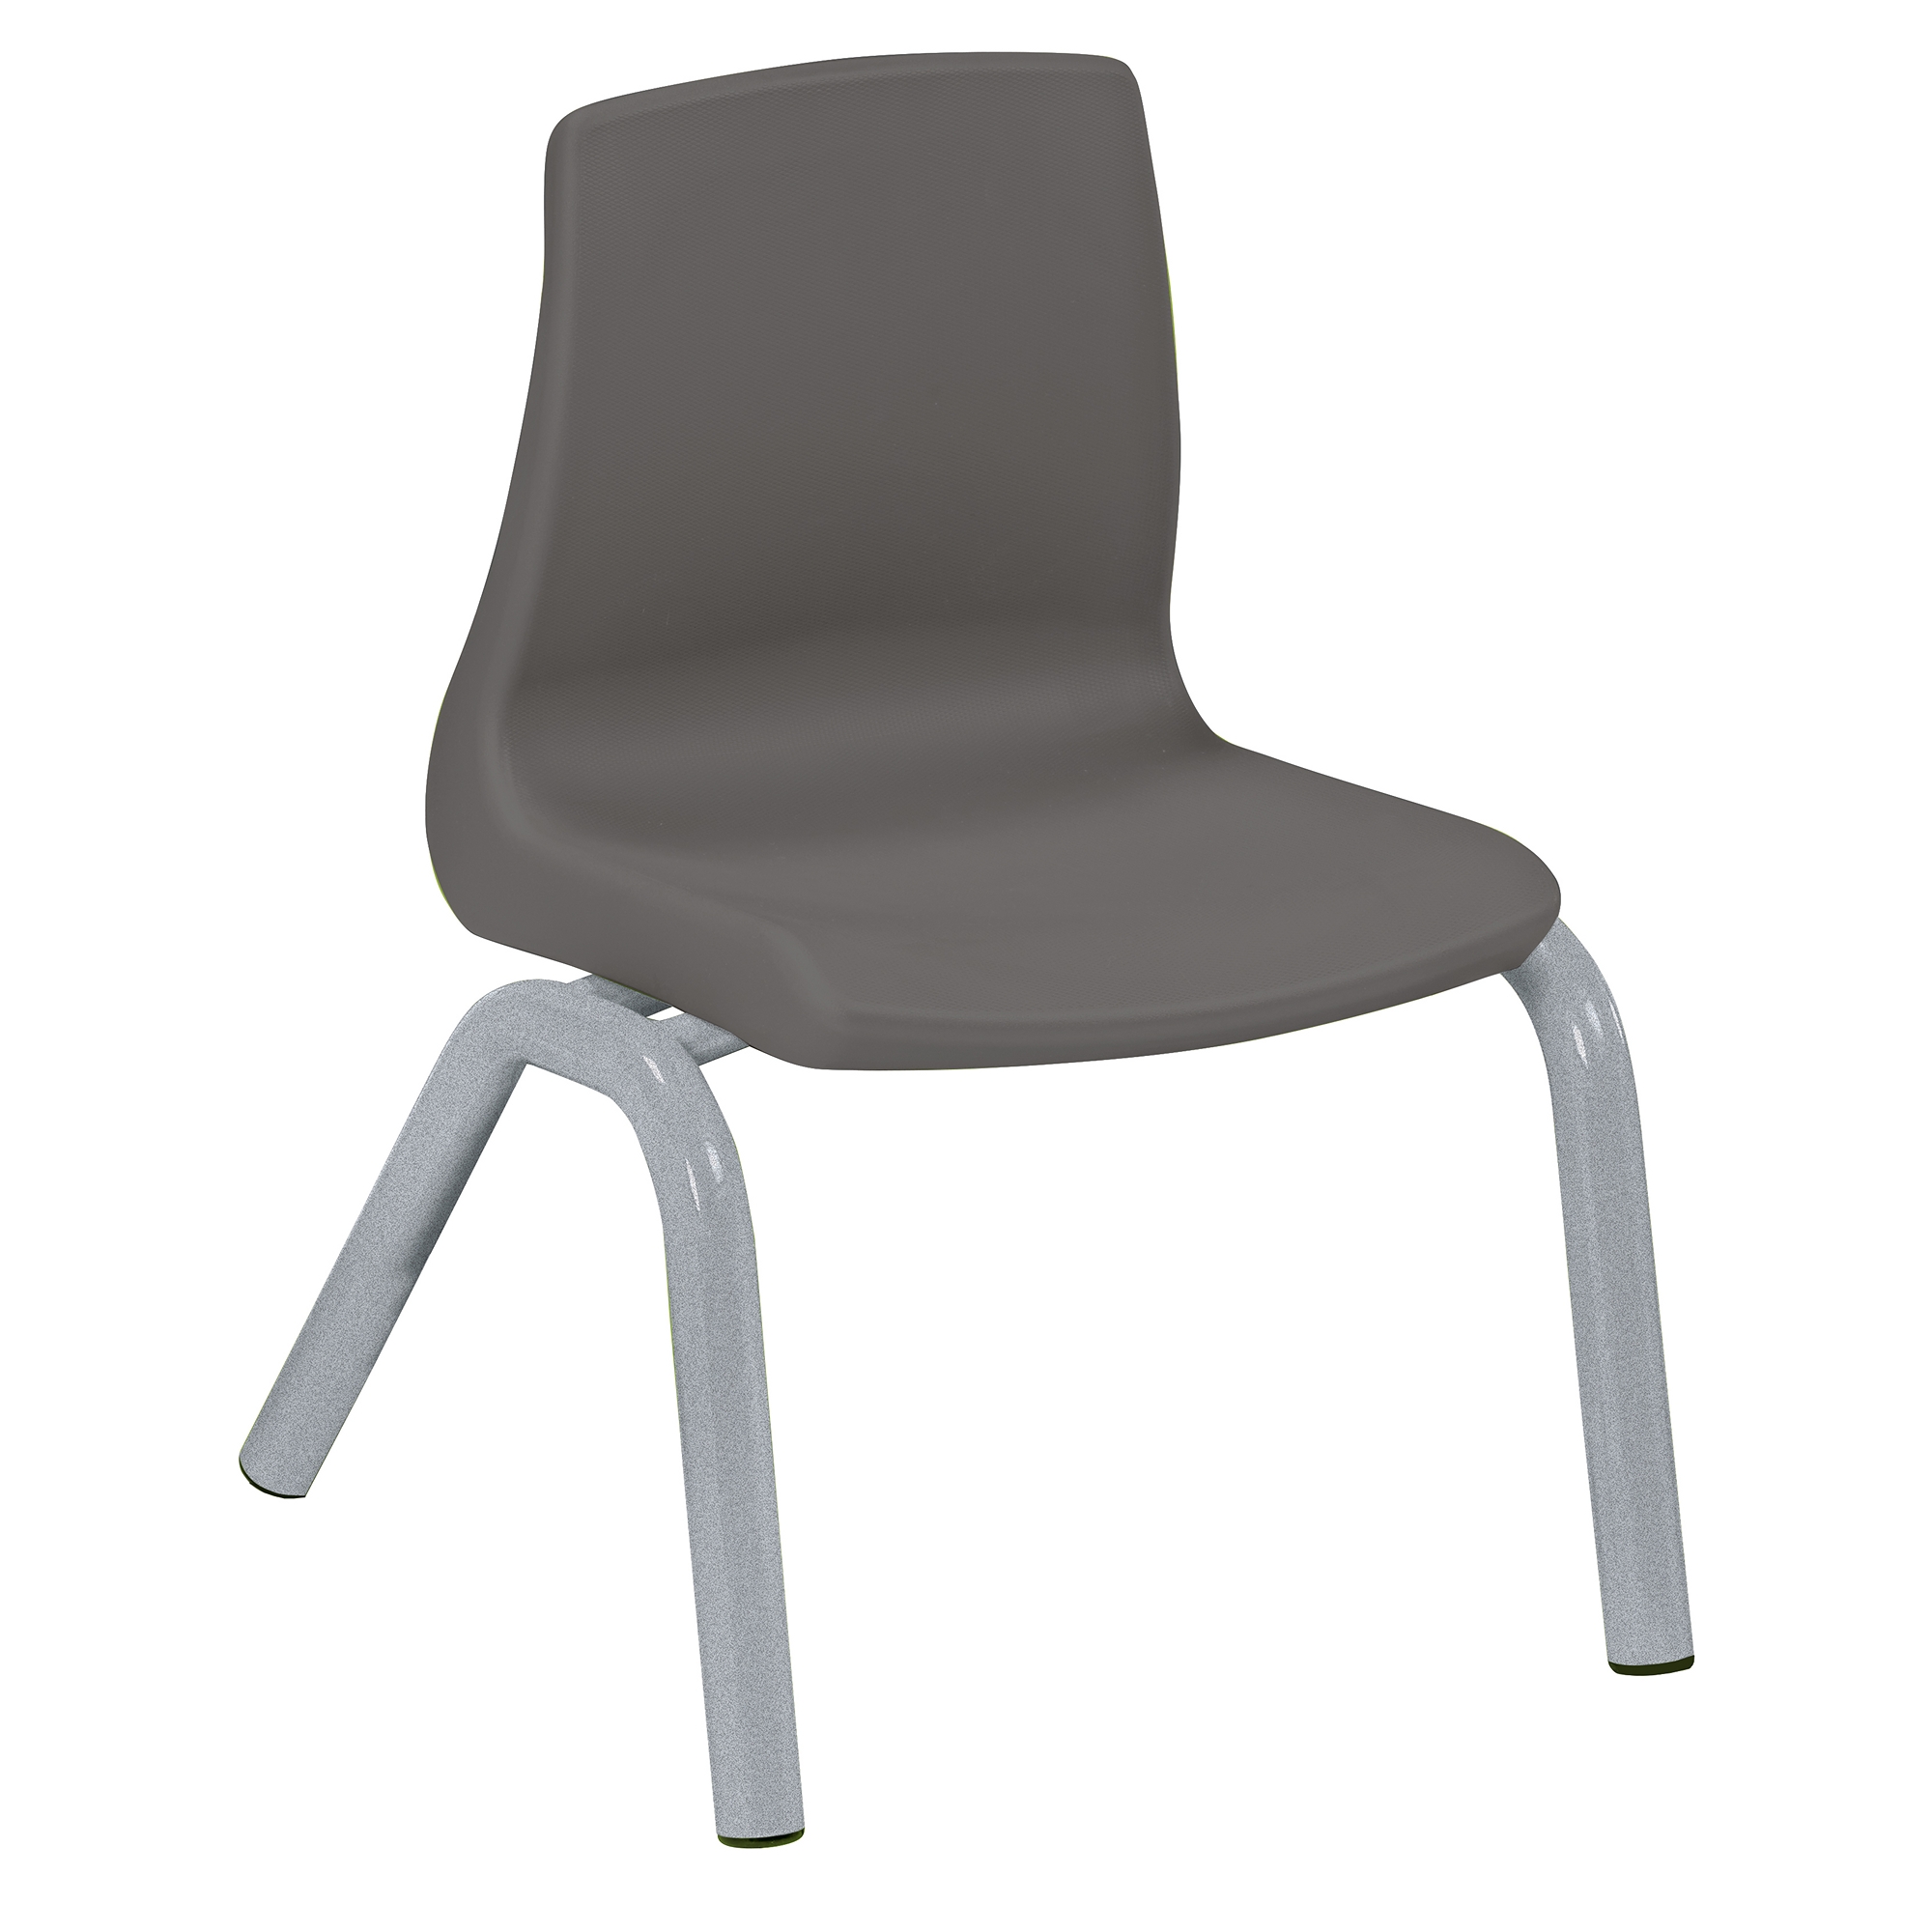 Harlequin Grey Chair Up To 2 Years